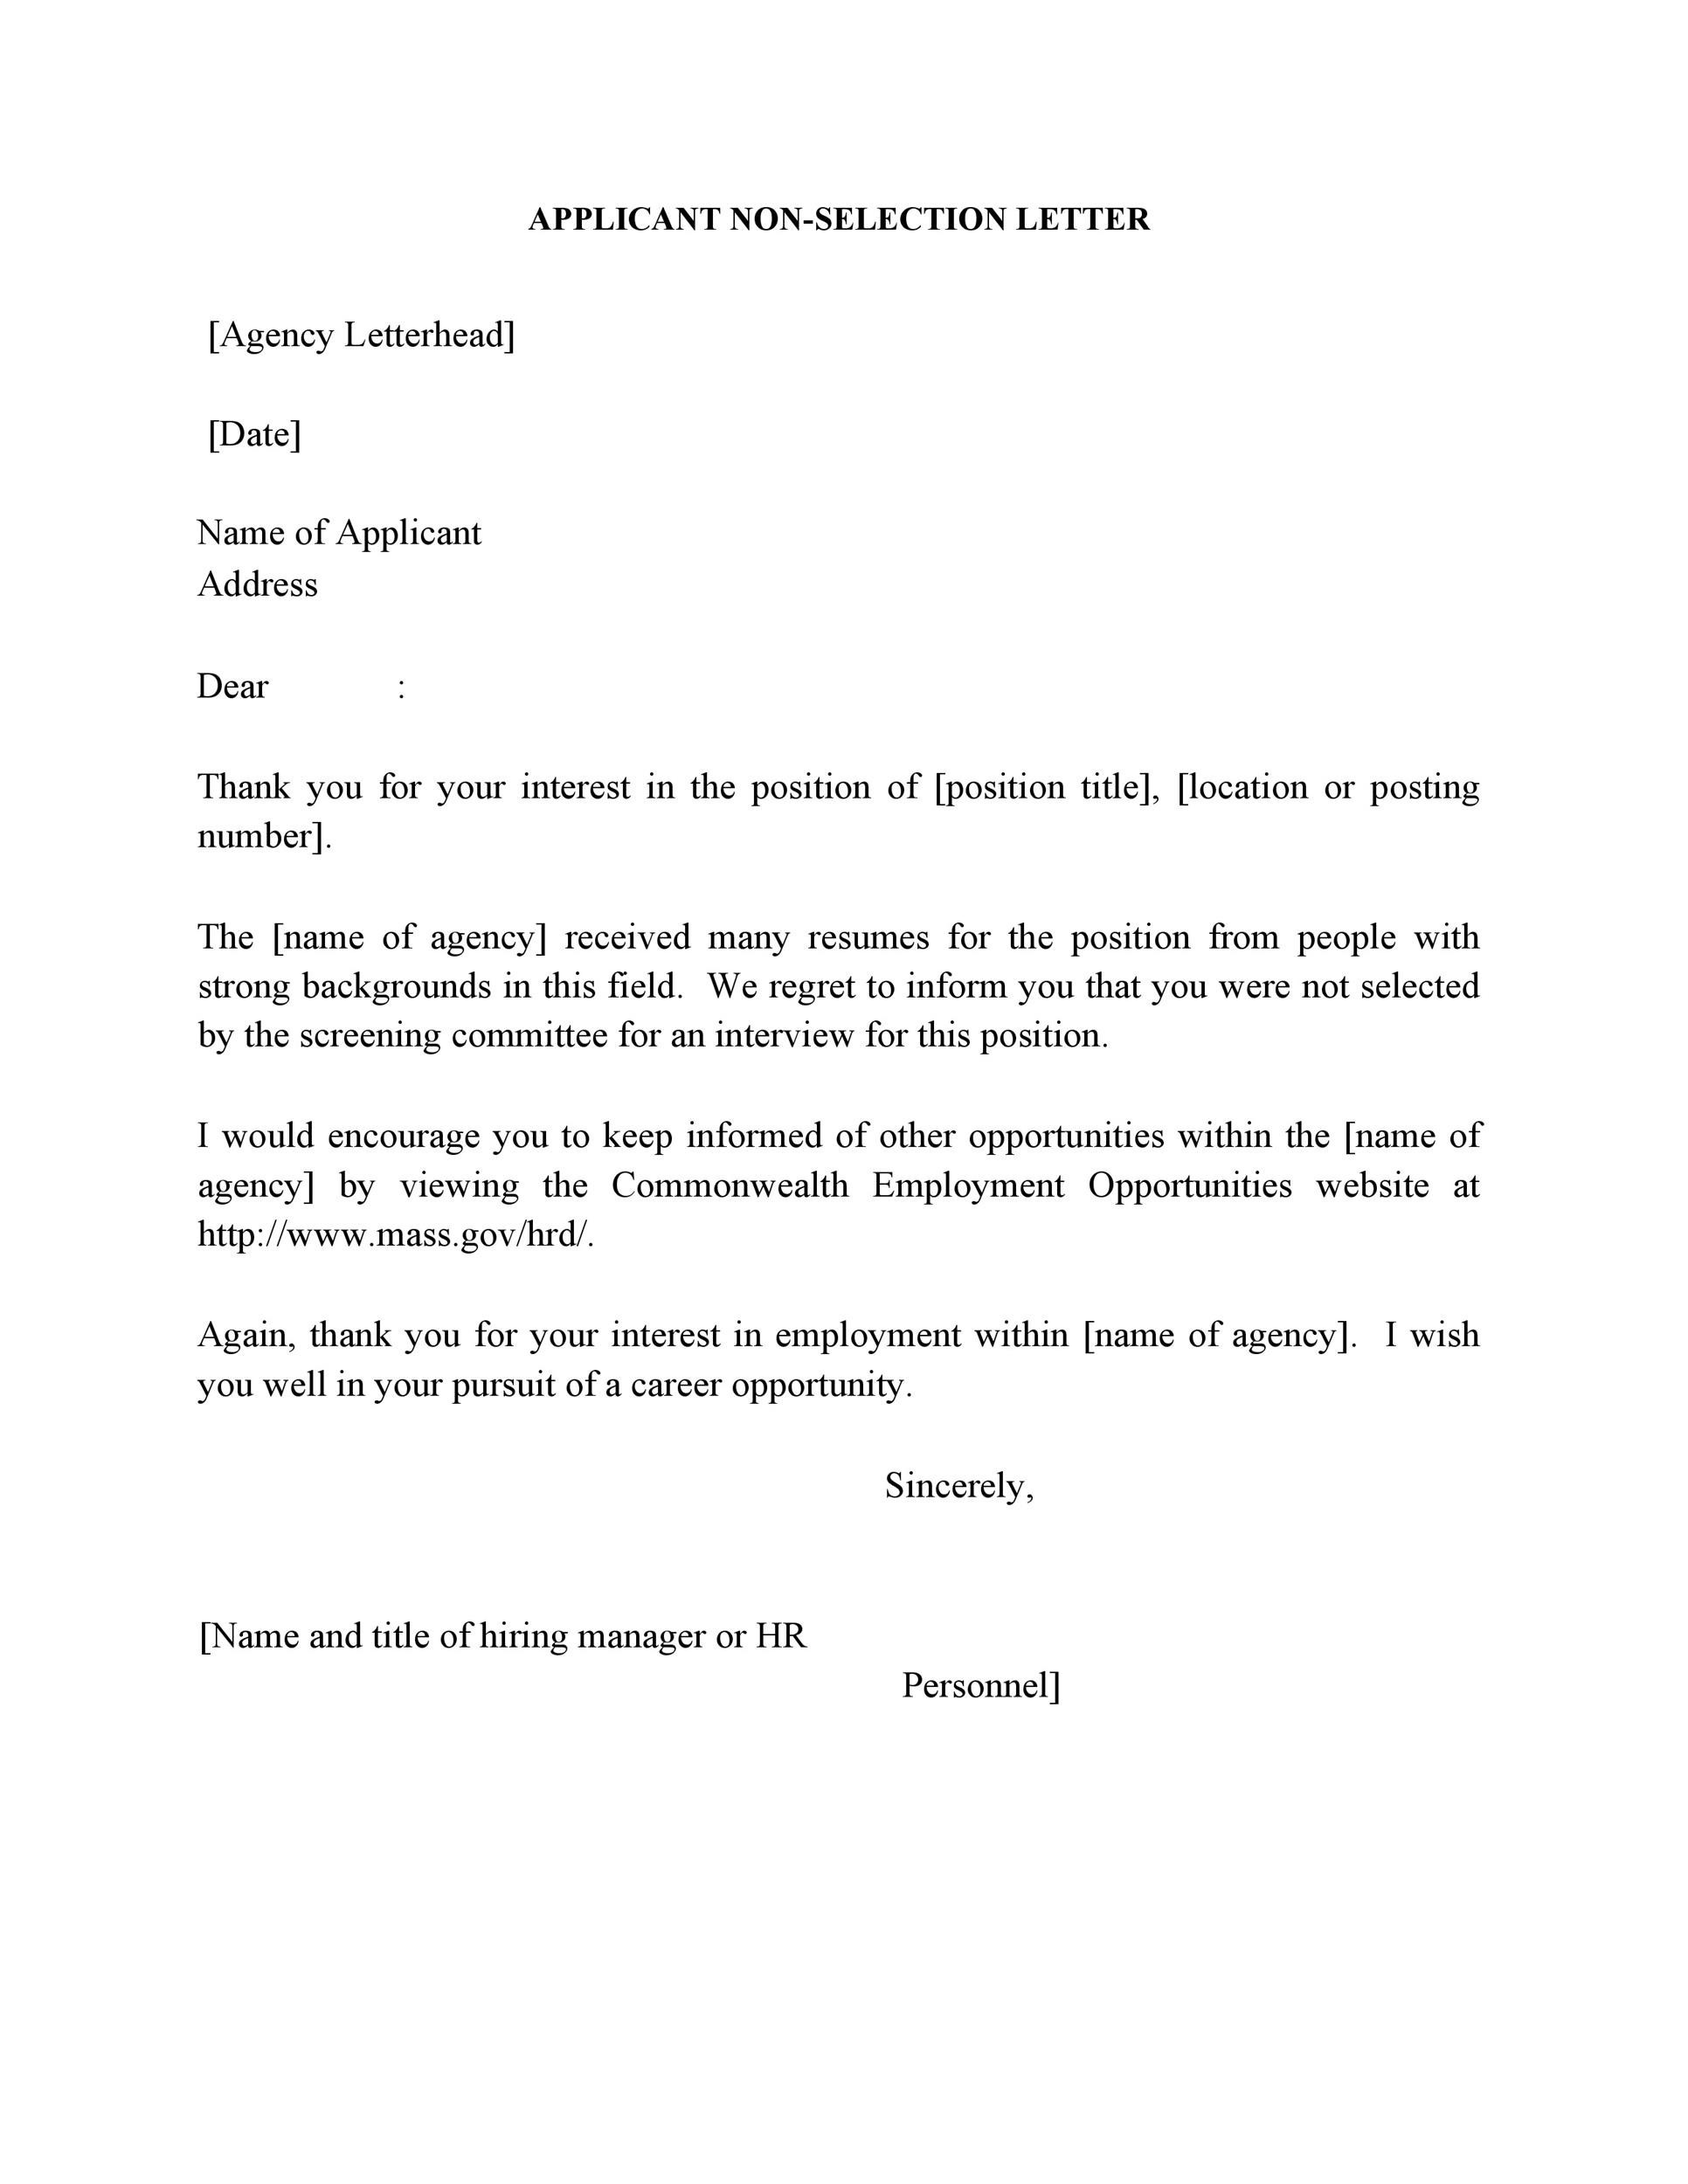 Sample Rejection Letter For Job Applicant from templatelab.com